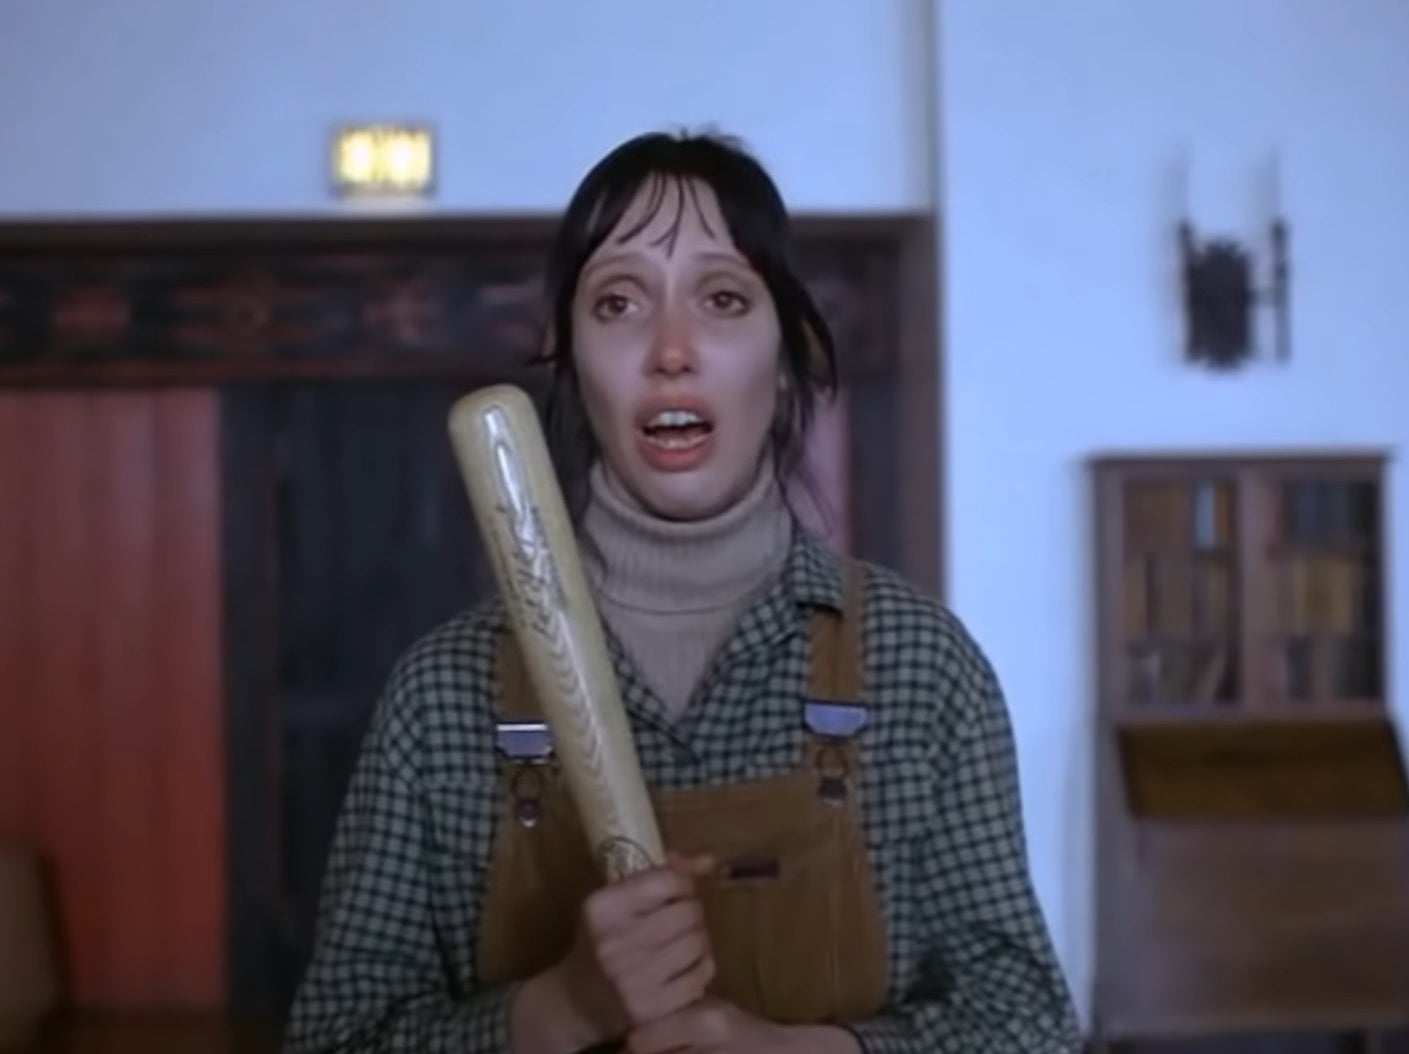 Wendy holding a bat in the Overlook Hotel lounge in &quot;The Shining&quot;